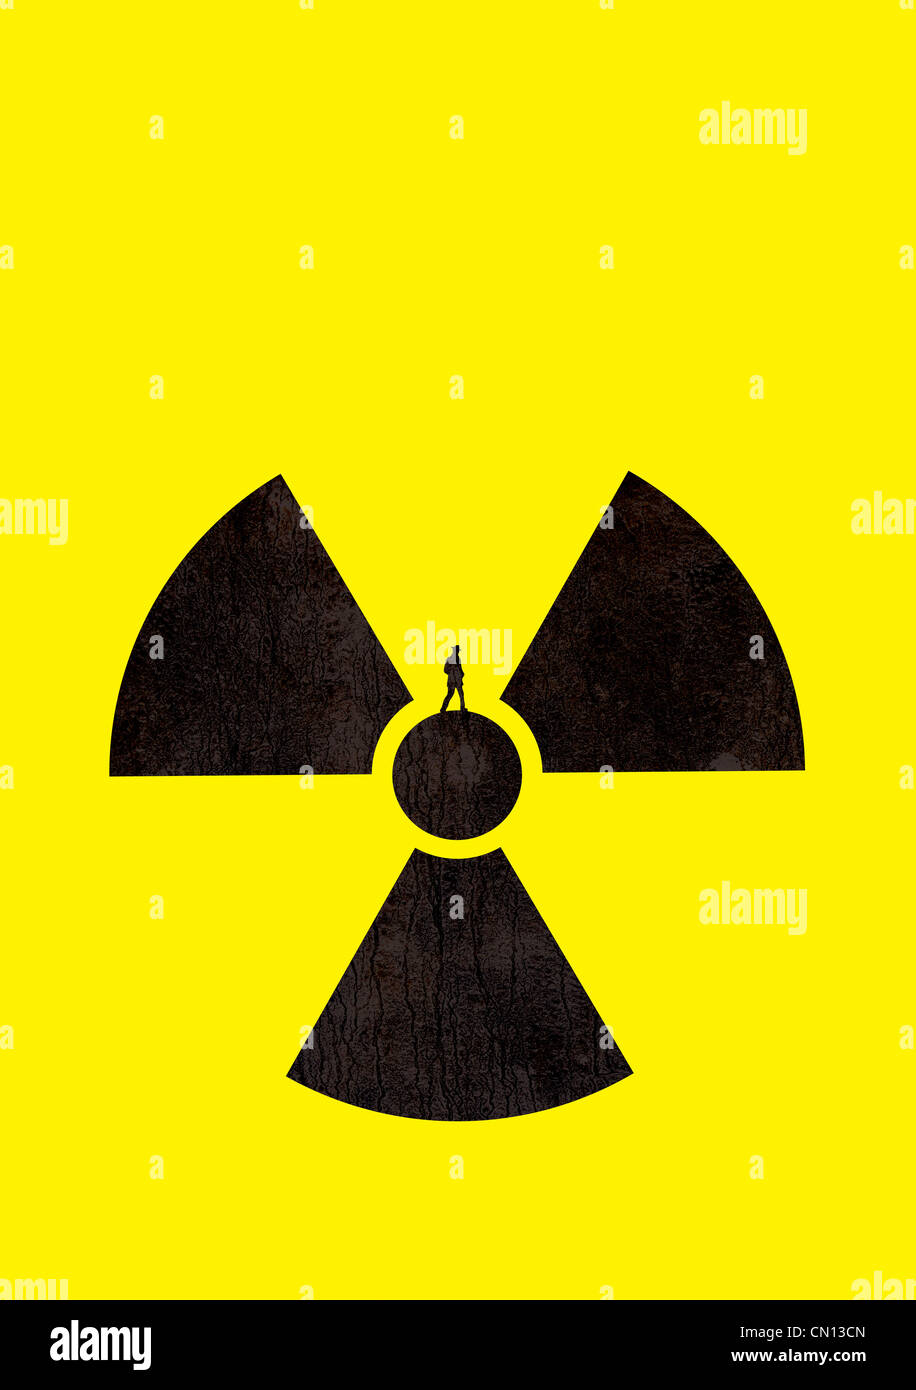 Man standing on a radioactive symbol. The man and symbol are silhouettes on a yellow background. Stock Photo